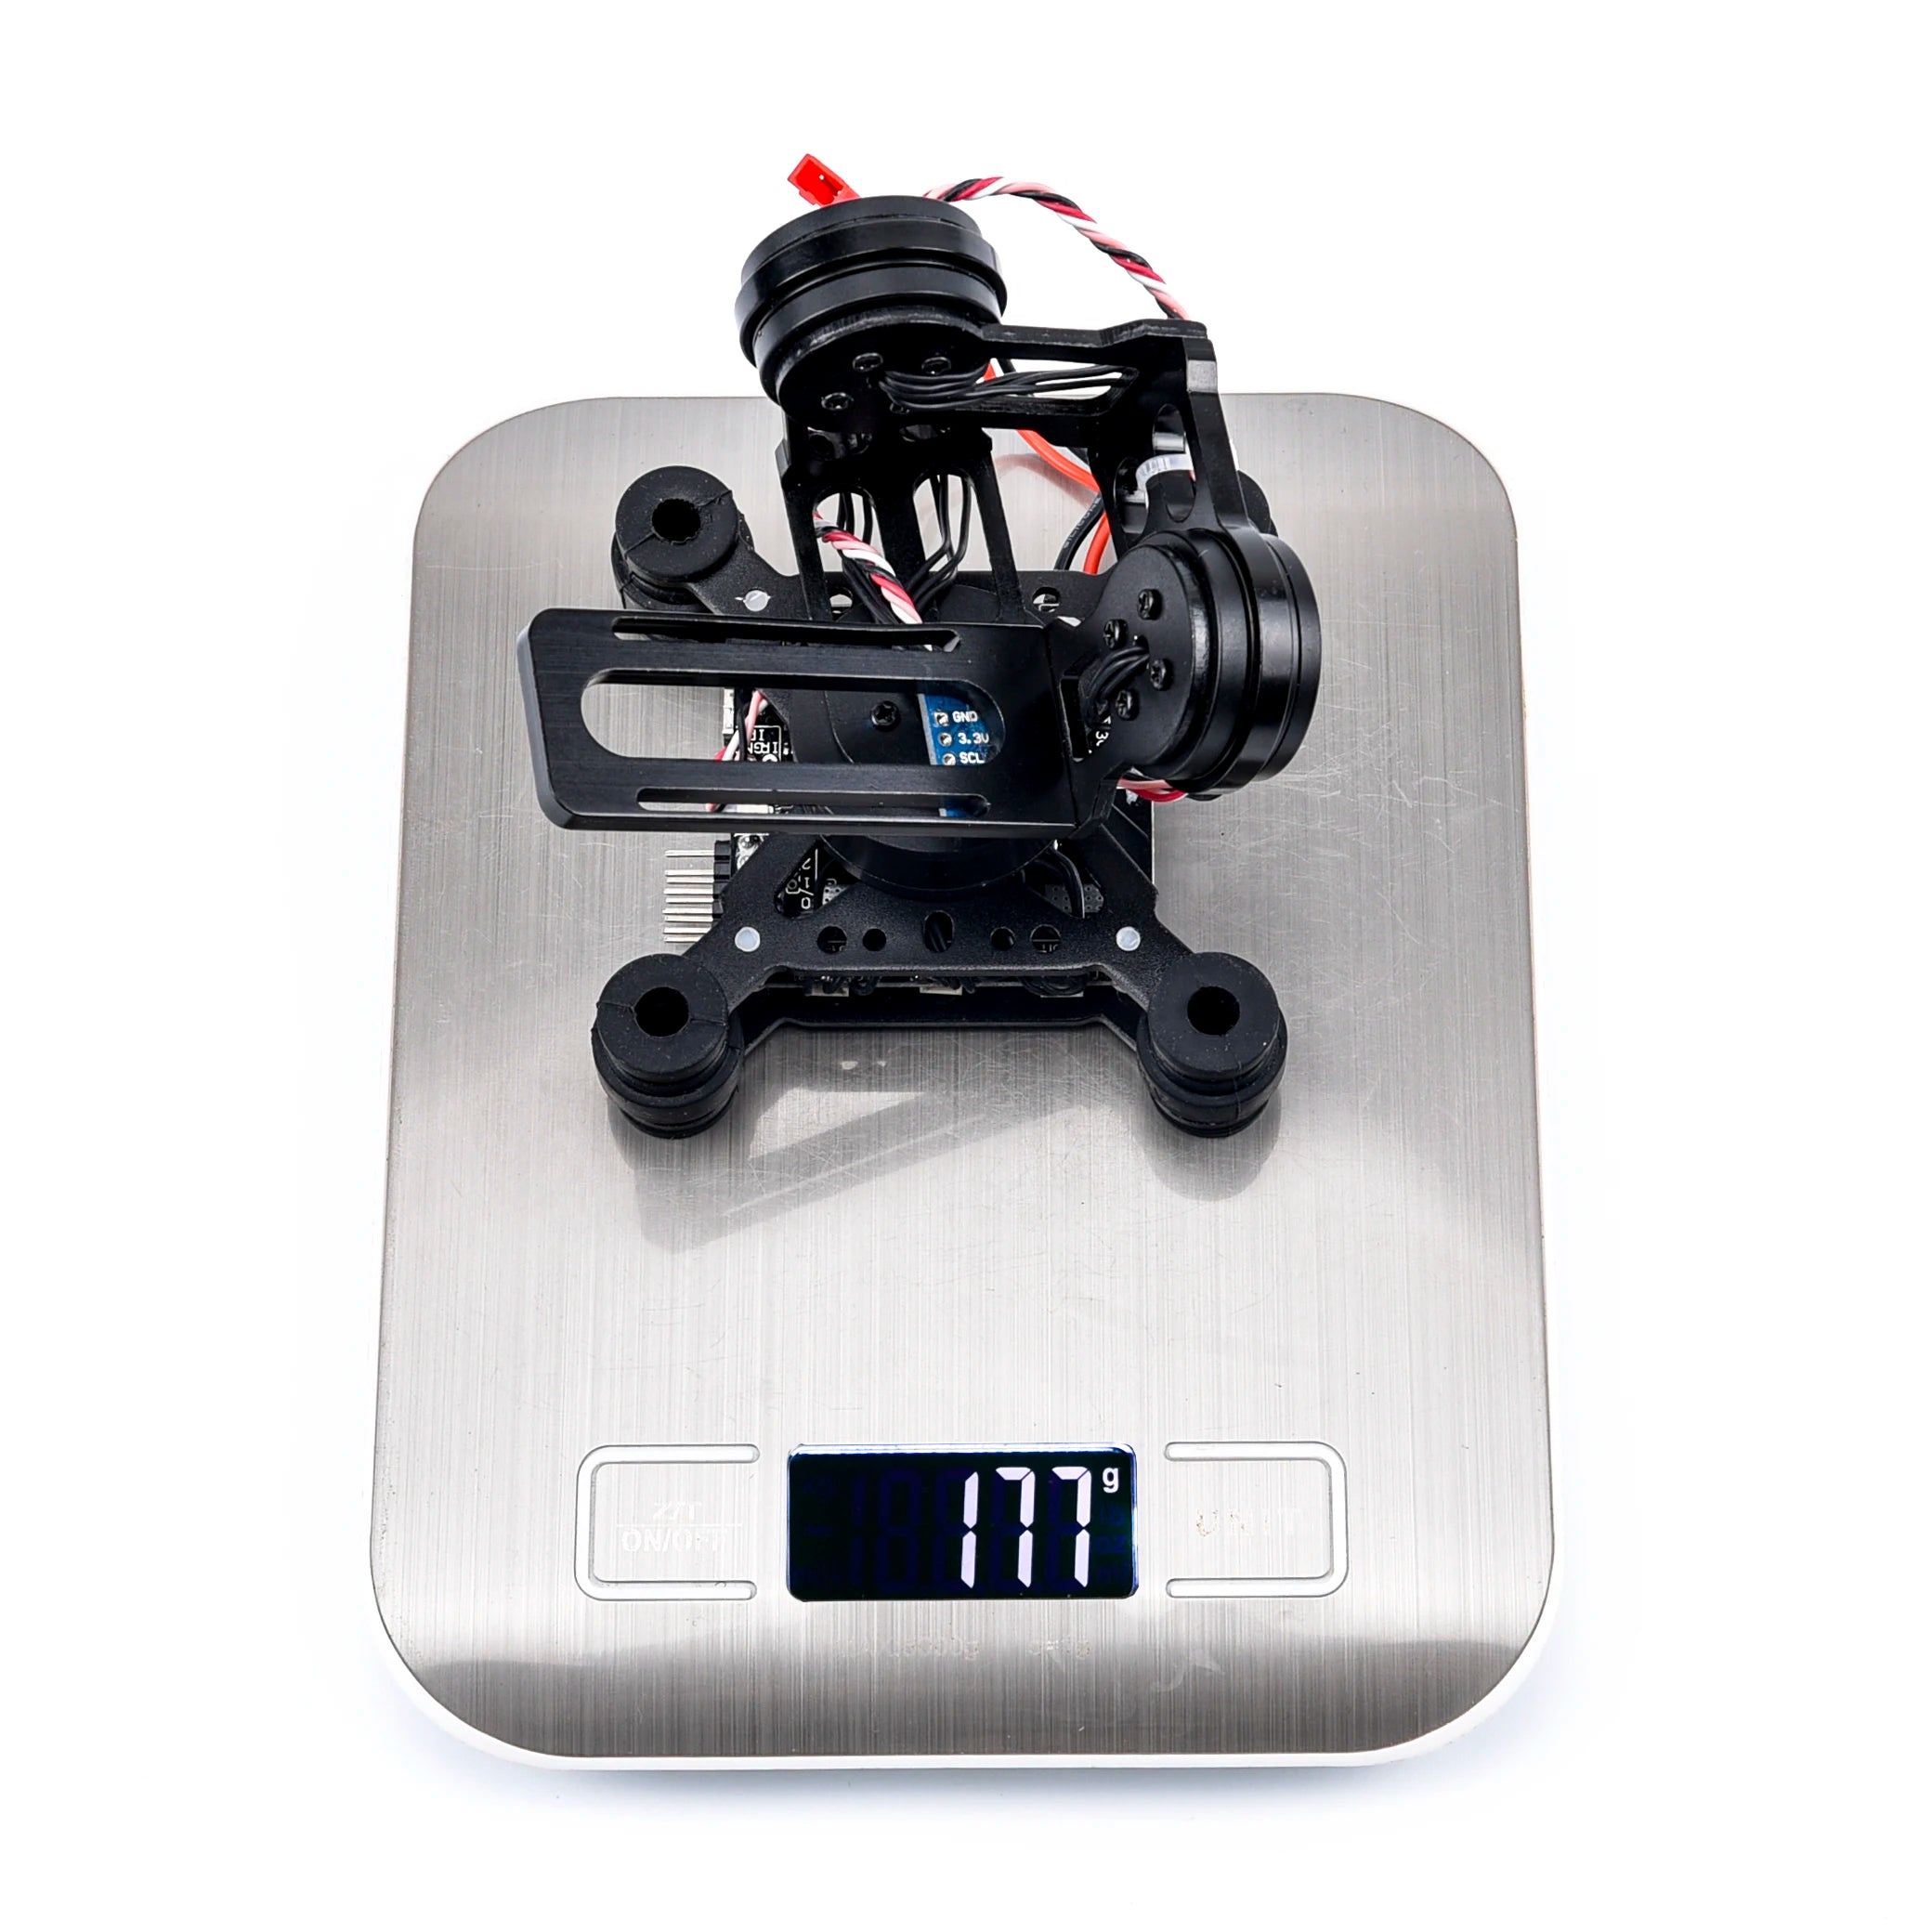 RTF 3 Axis 3Axis Brushless Gimbal, motors with resistances of 12 Ohm may be handled with care . 10 Ohm